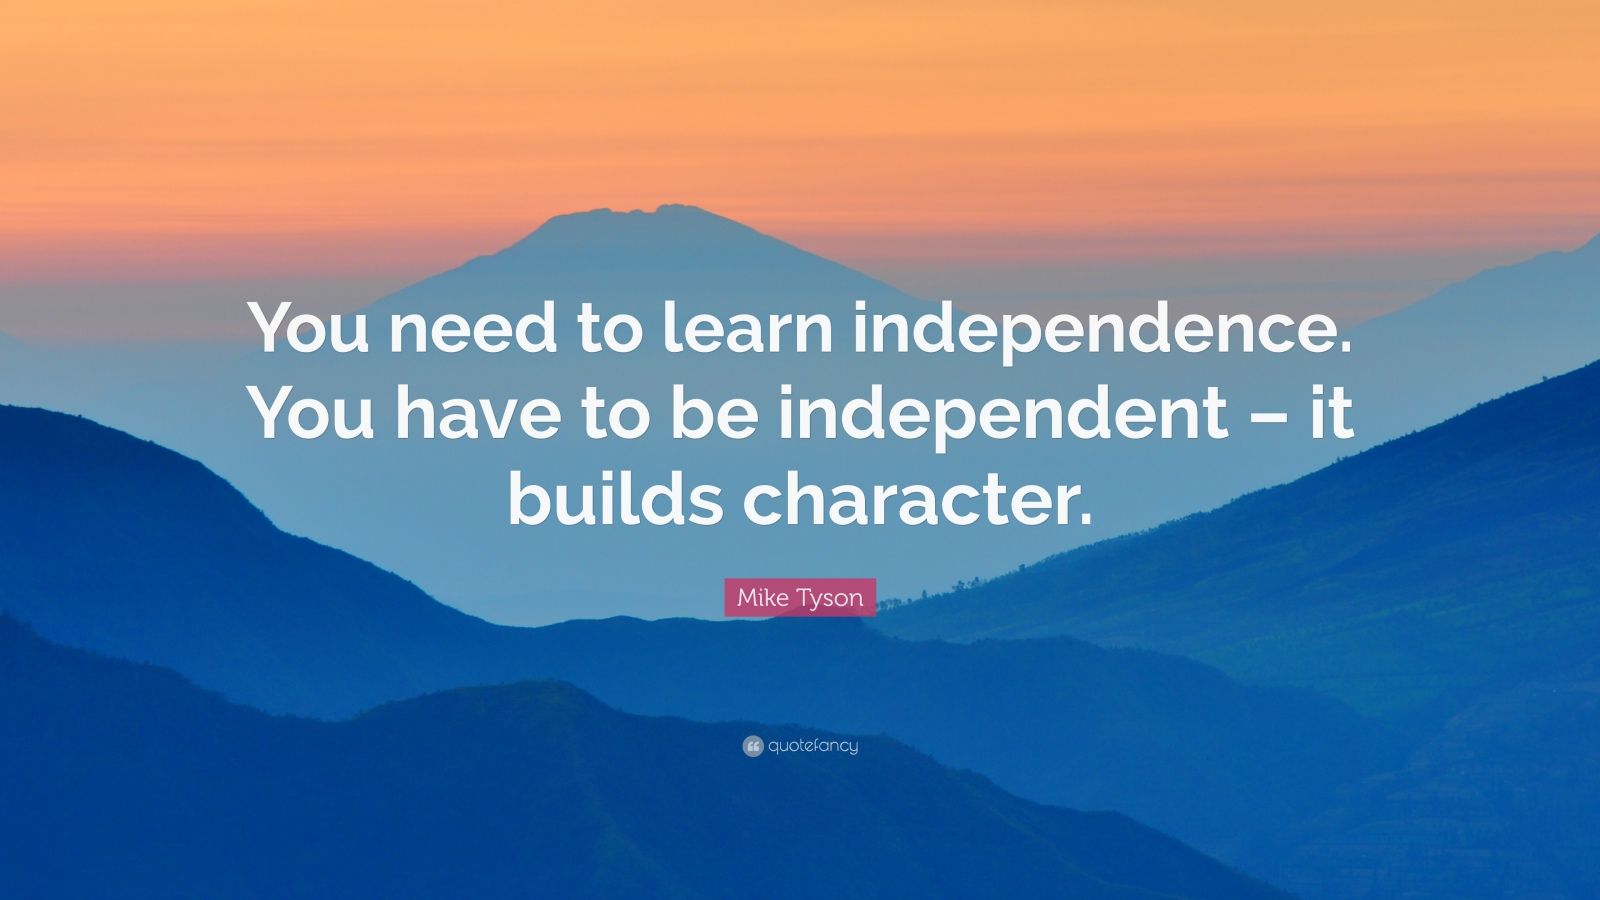 Mike Tyson Quote: “You need to learn independence. You have to be